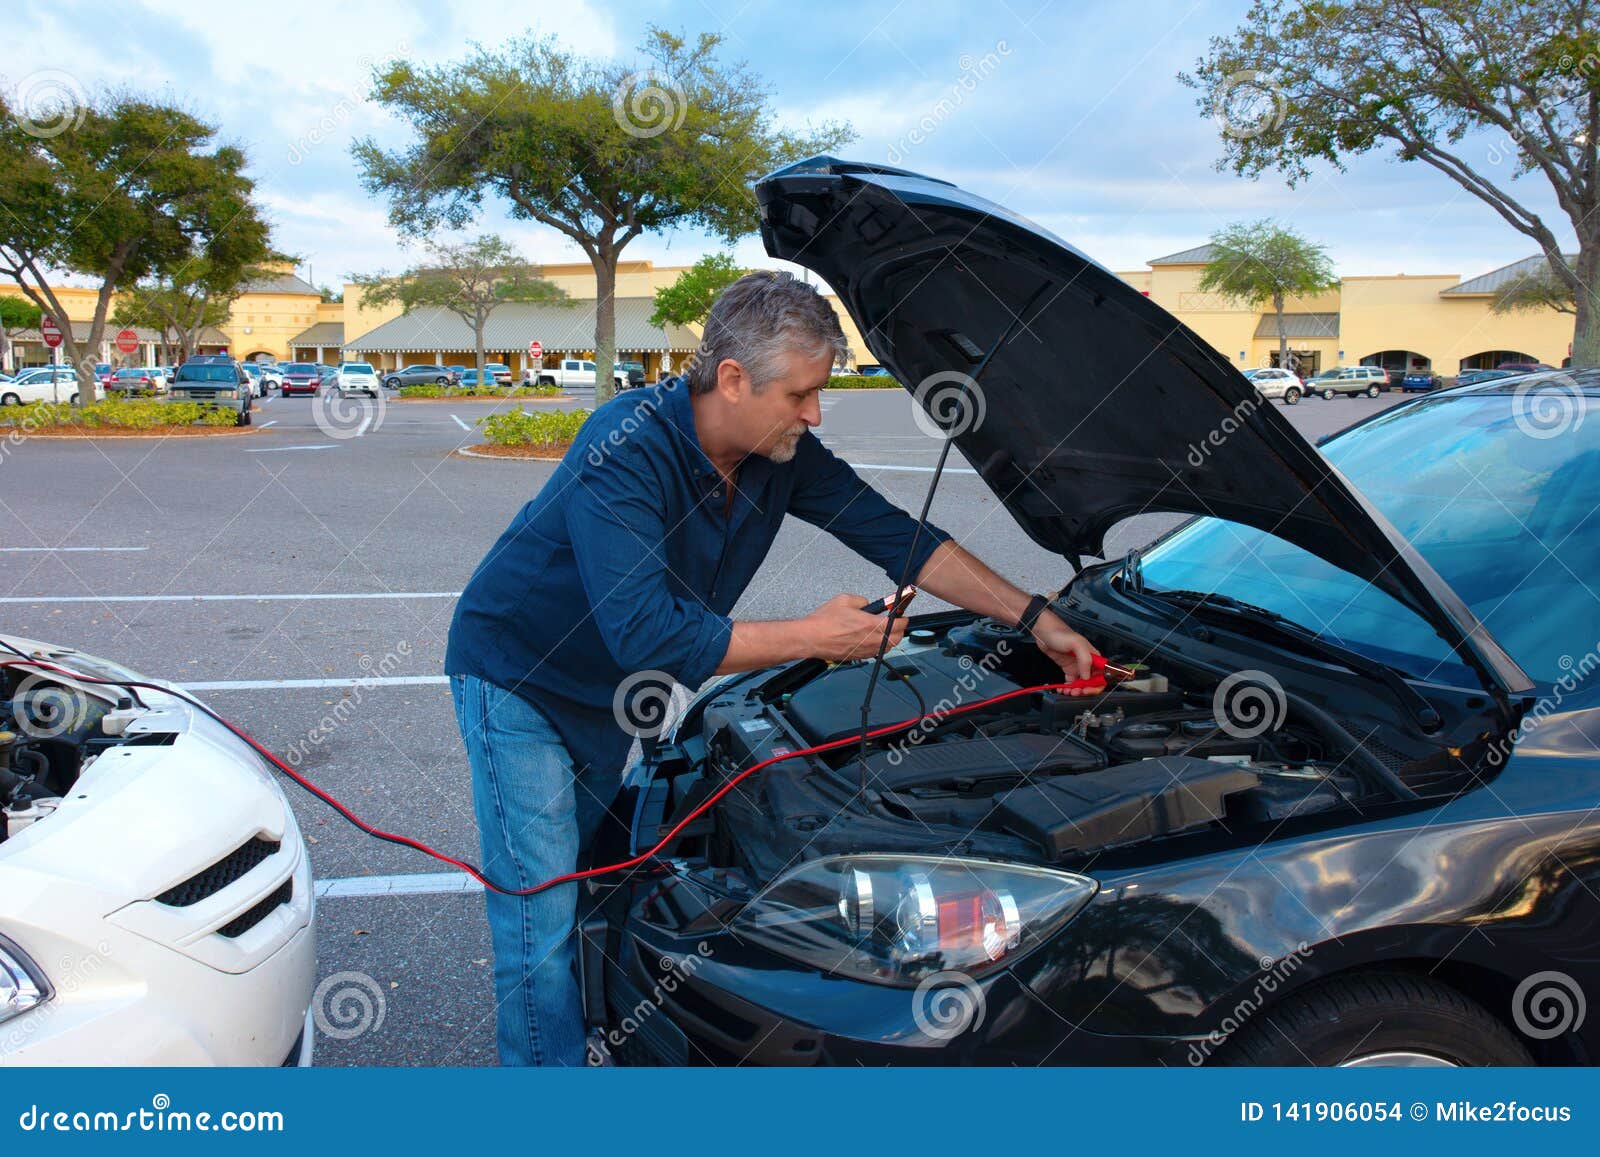 man jump starting a car with jumper cables